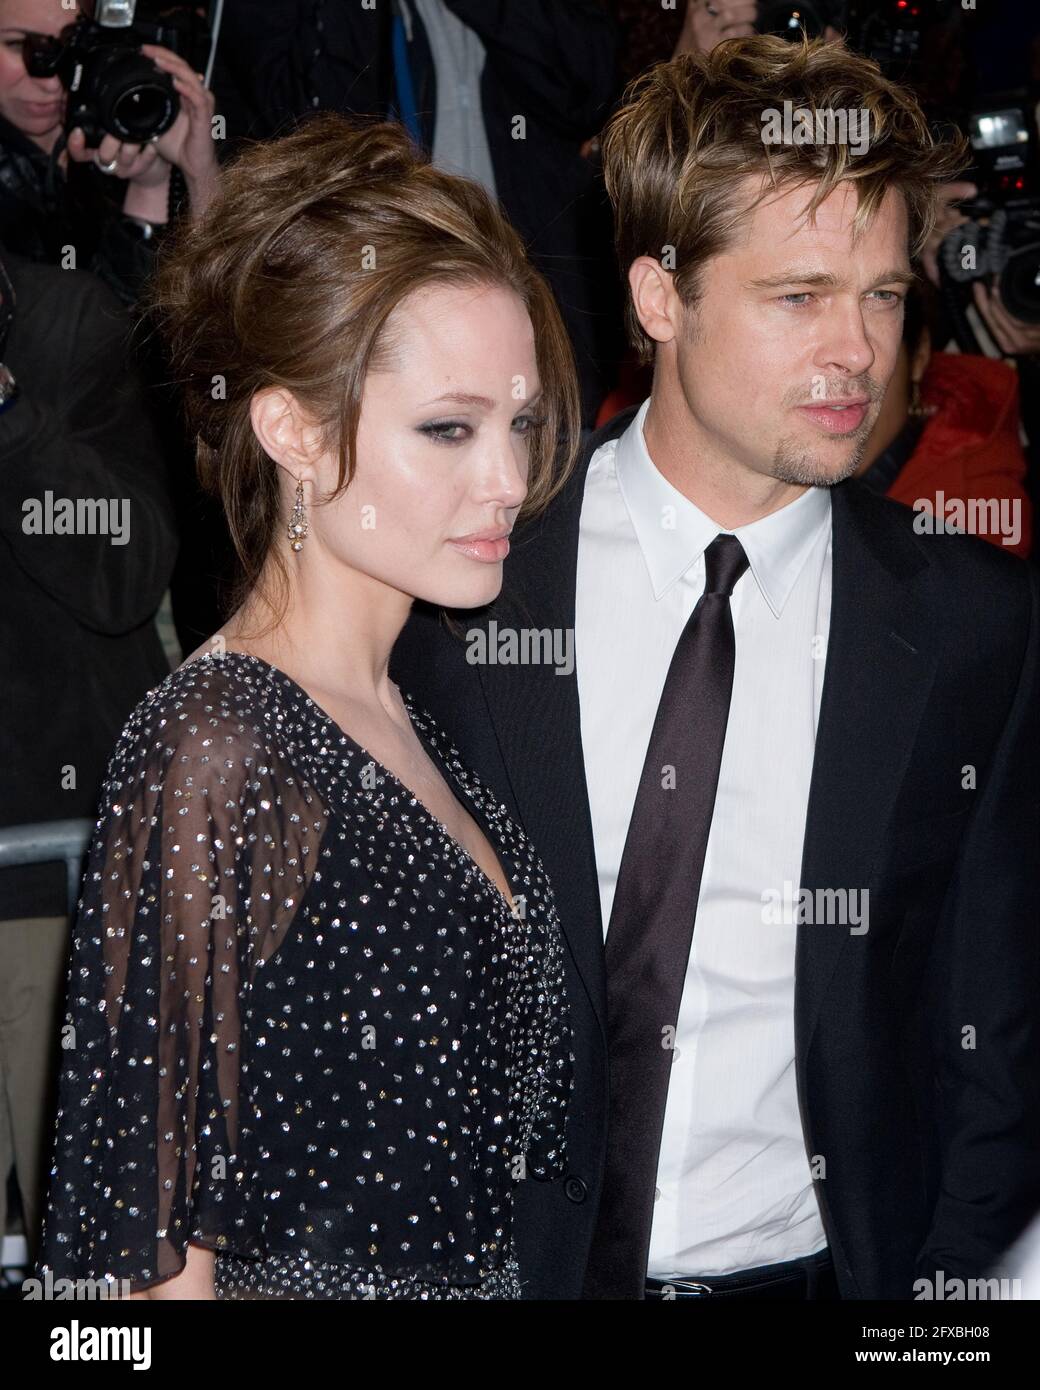 Actress Angelina Jolie and actor Brad Pitt attend the World Premiere of 'The Good Shepherd' presented by Universal Pictures at the Ziegfeld Theatre on Stock Photo